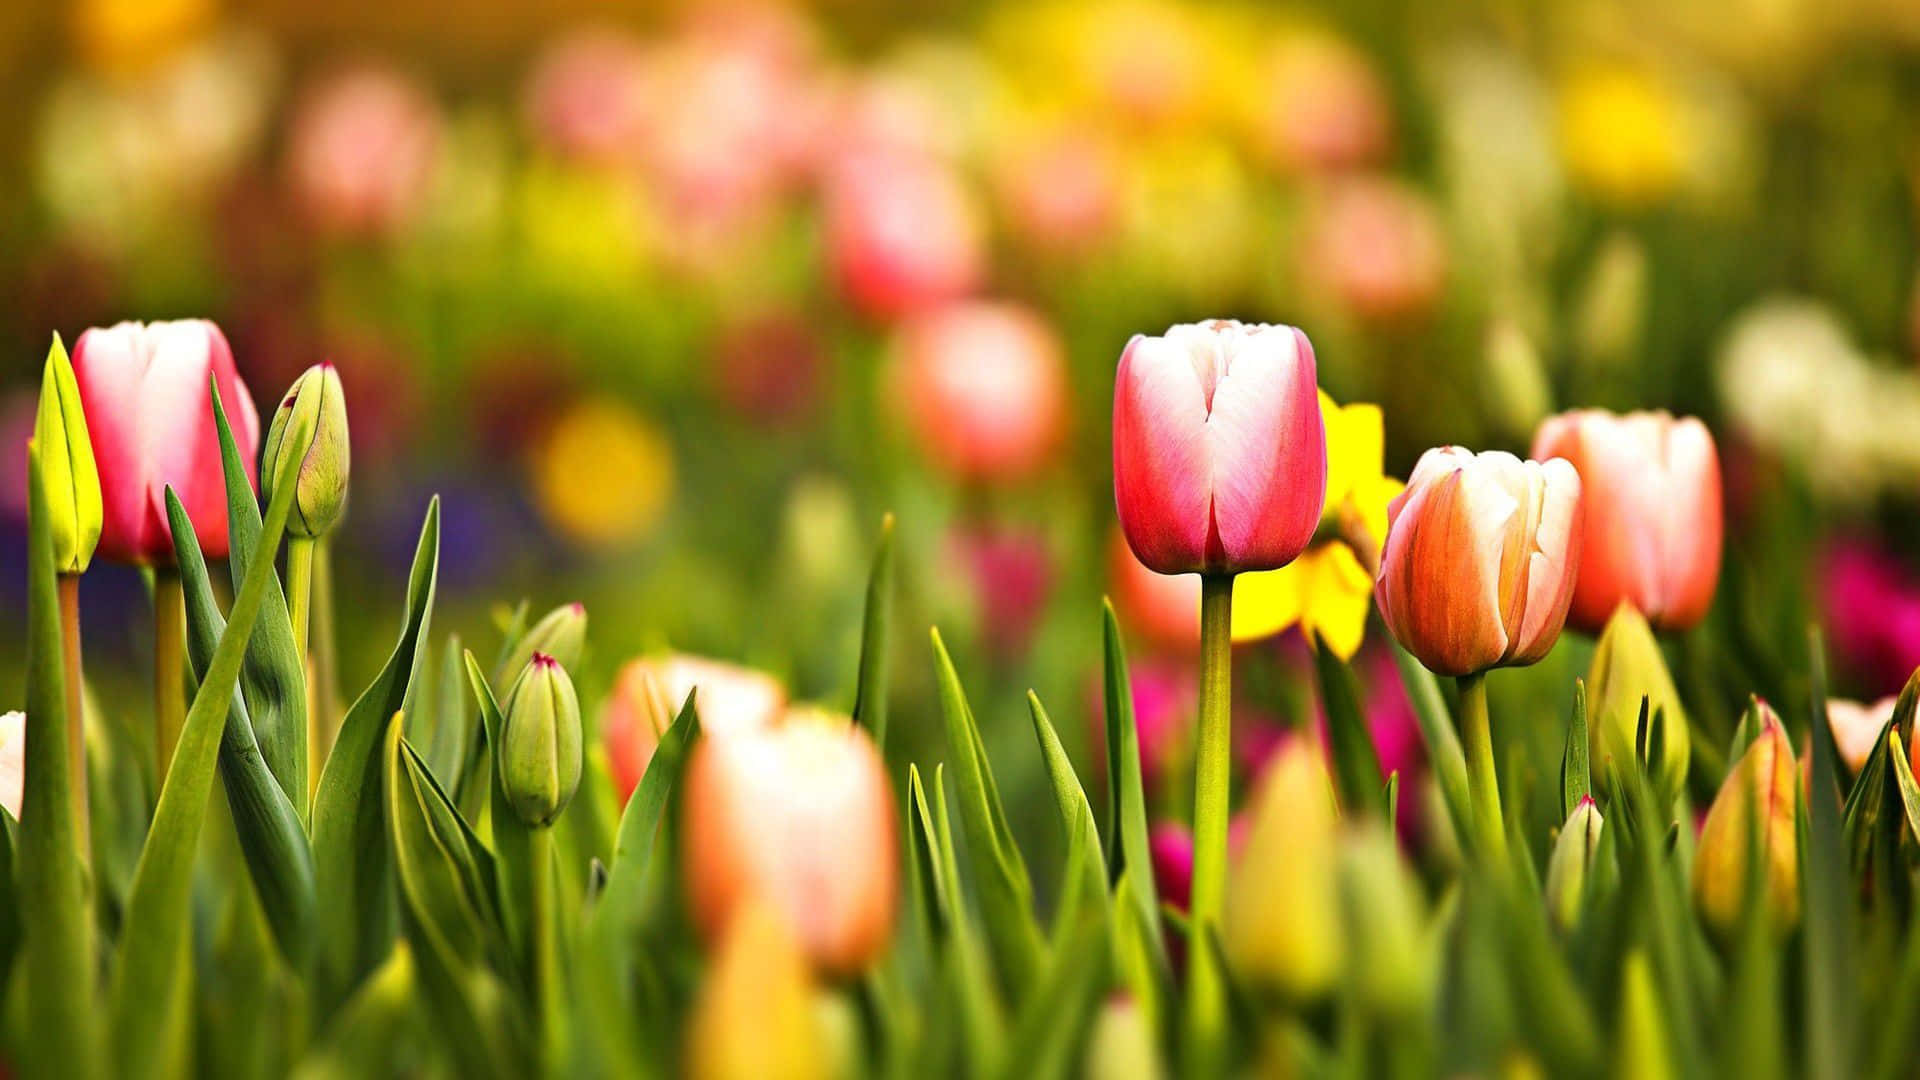 "Enjoy the beauty of spring flowers on your desktop background" Wallpaper